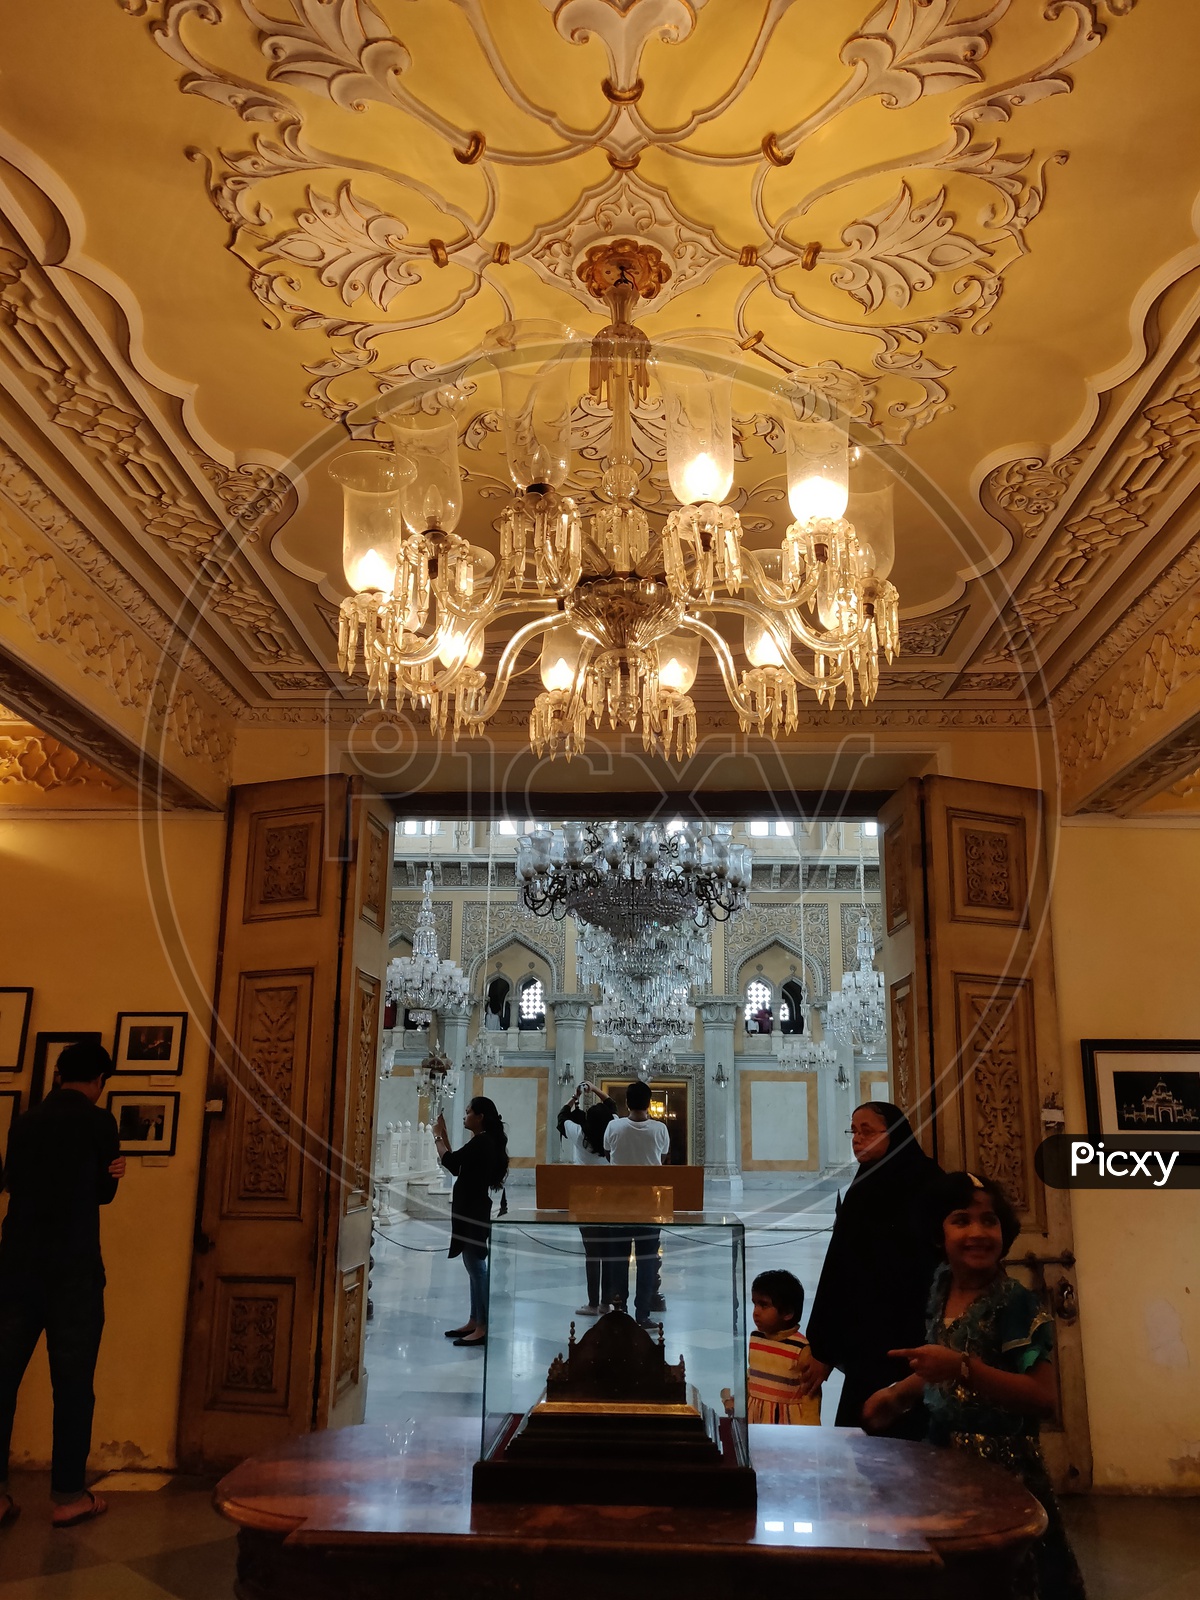 Interiors of Chowmahalla Palace  with Chandeliers